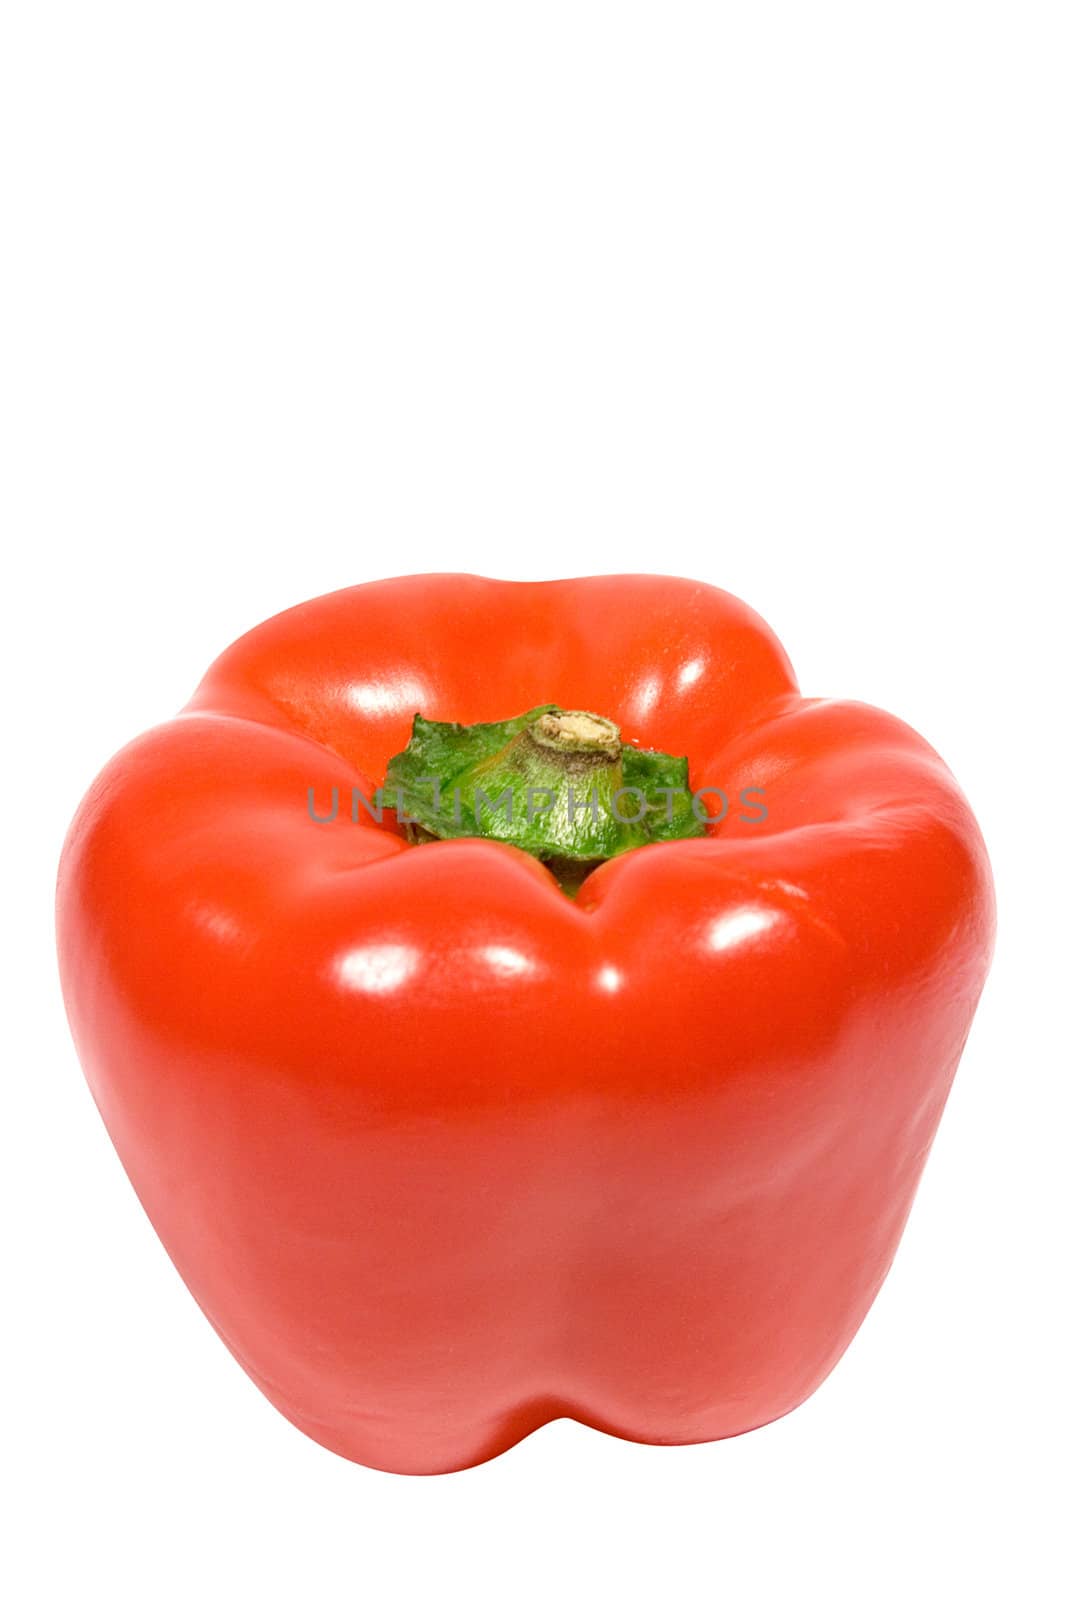 Red pepper isolated on a white background. File contains clipping path.